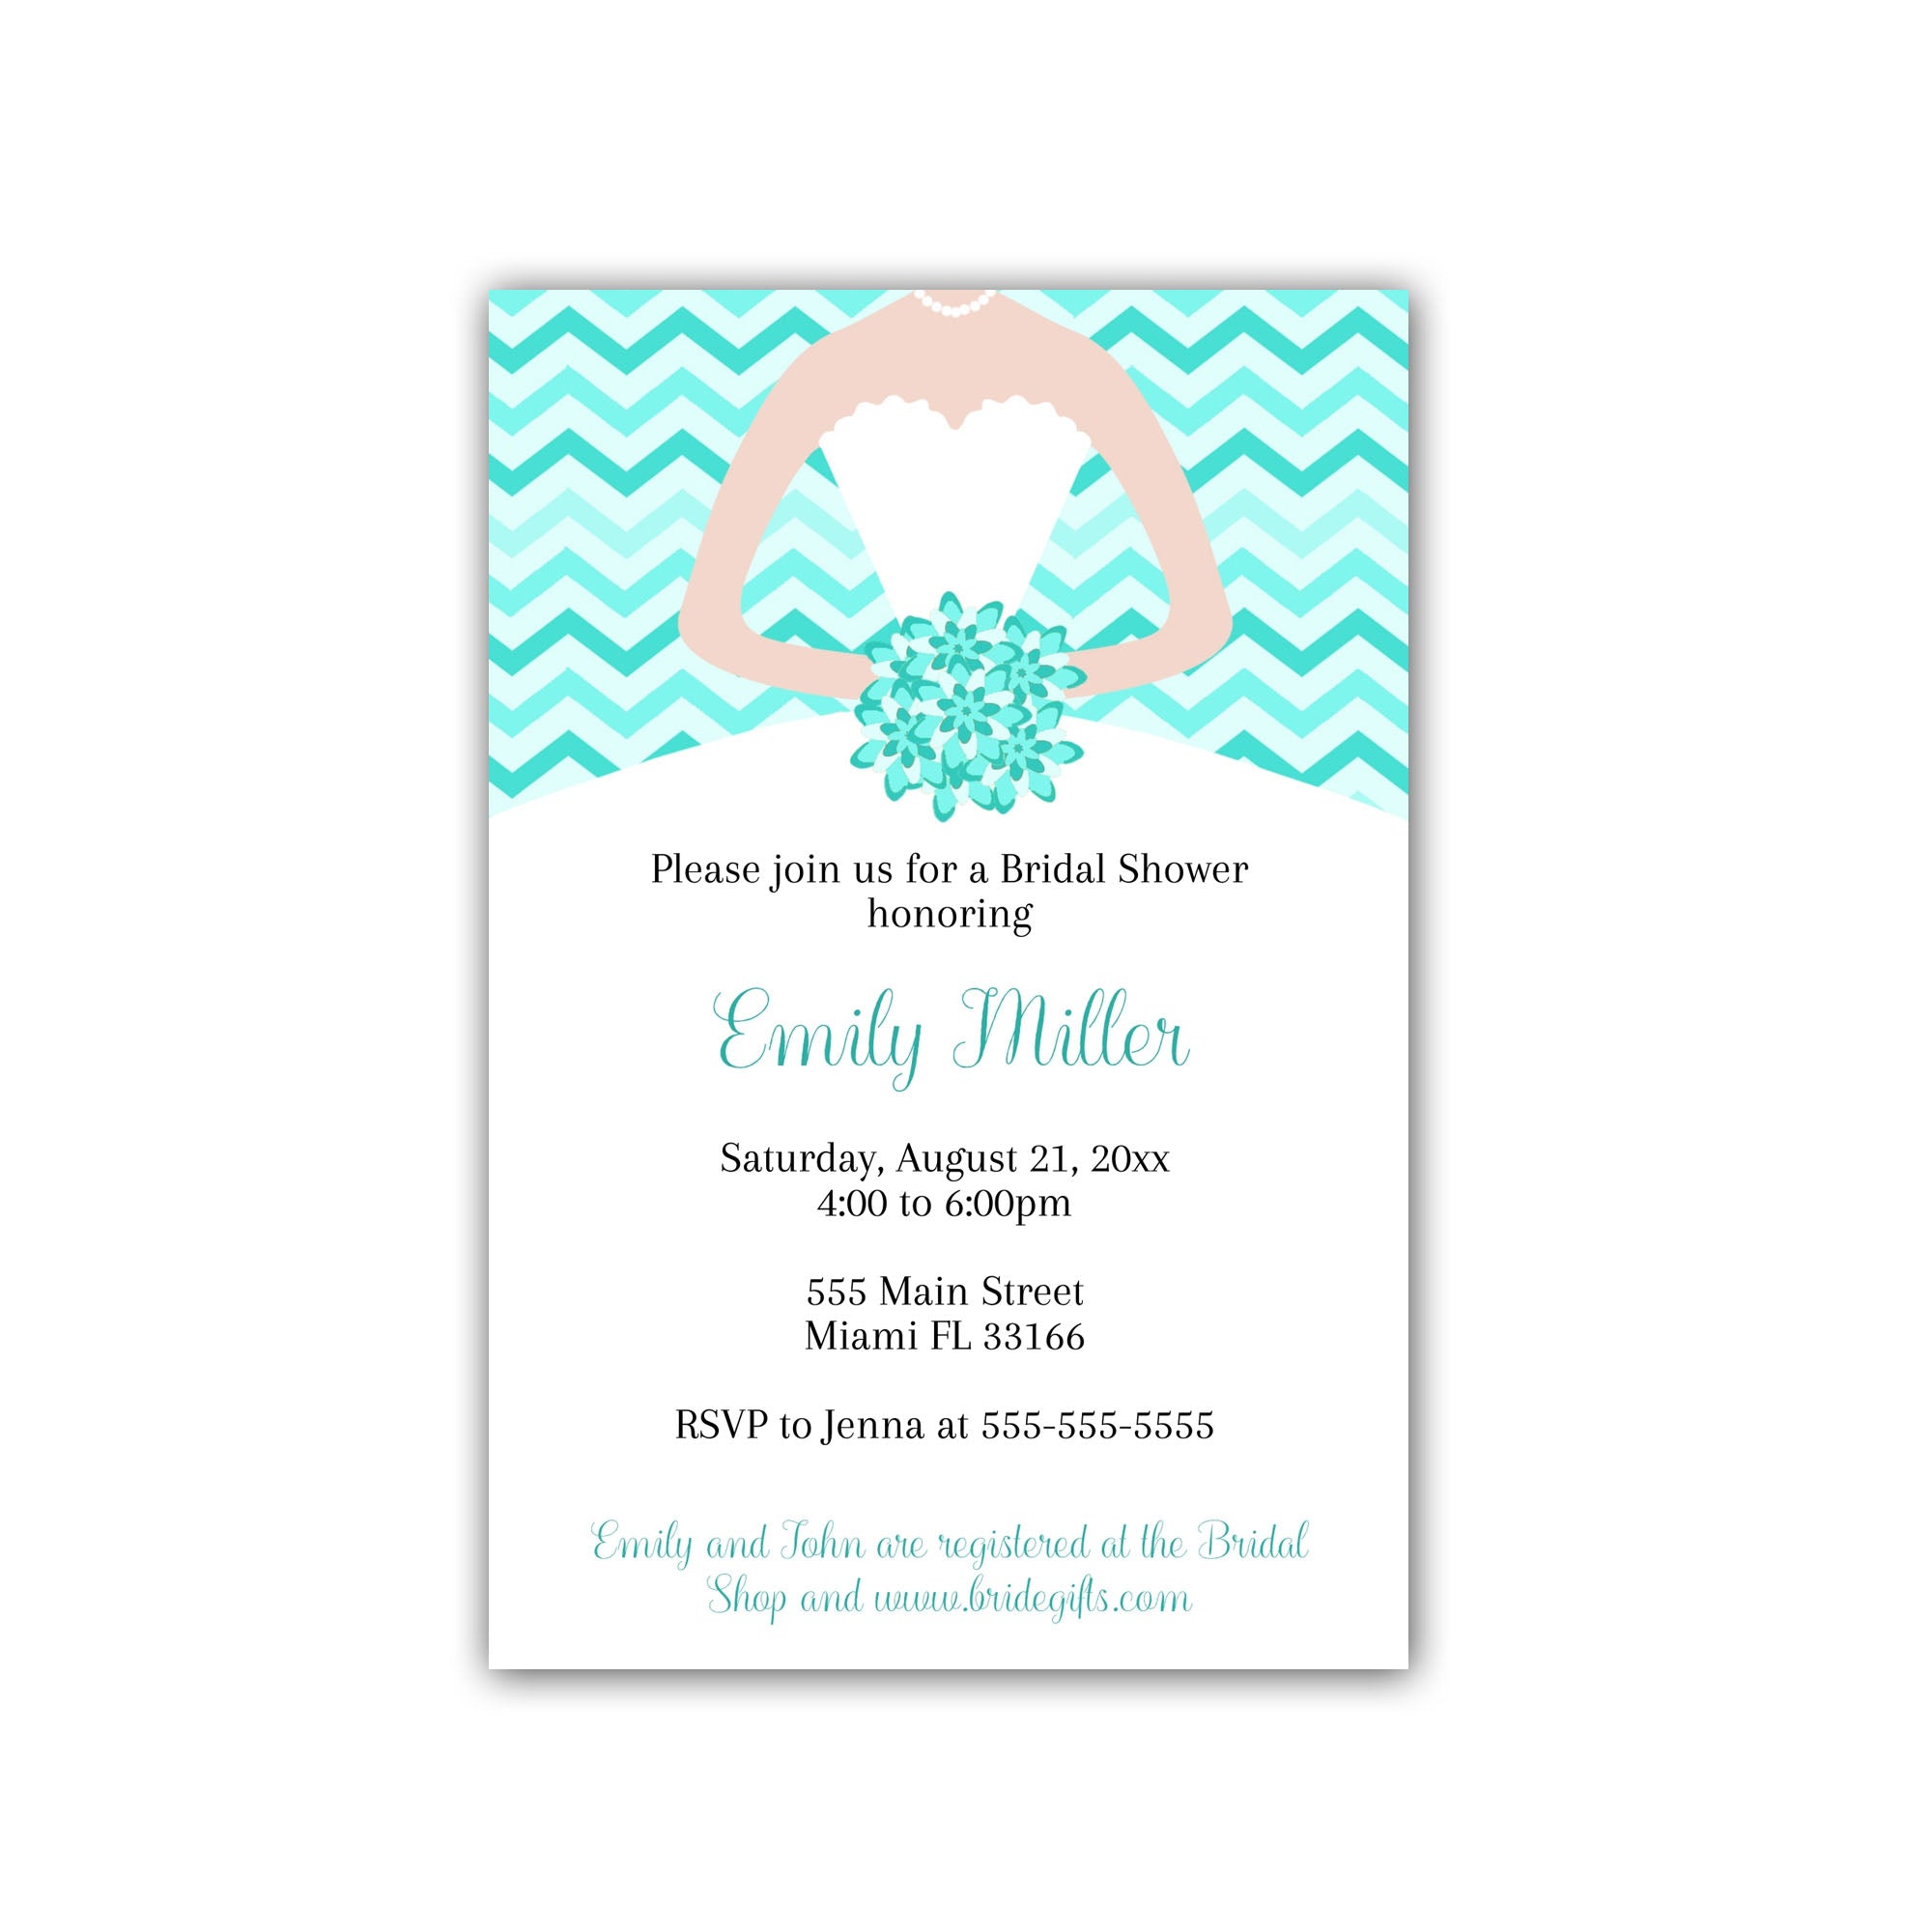 Dress invitation teal quiceanera sweet 16 or bridal shower